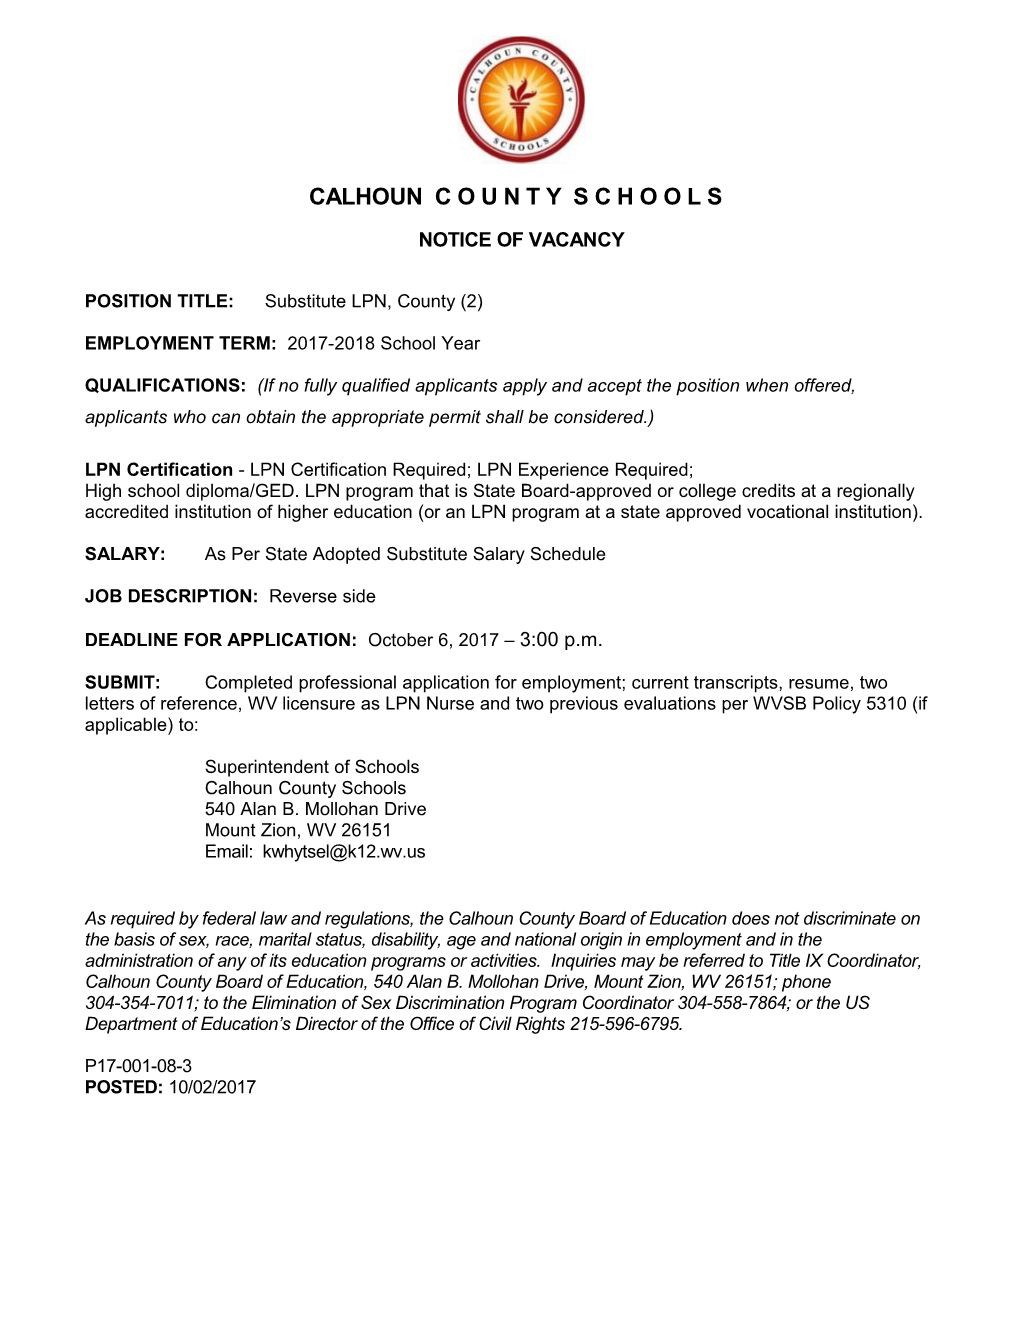 POSITION TITLE:Substitute LPN, County (2)